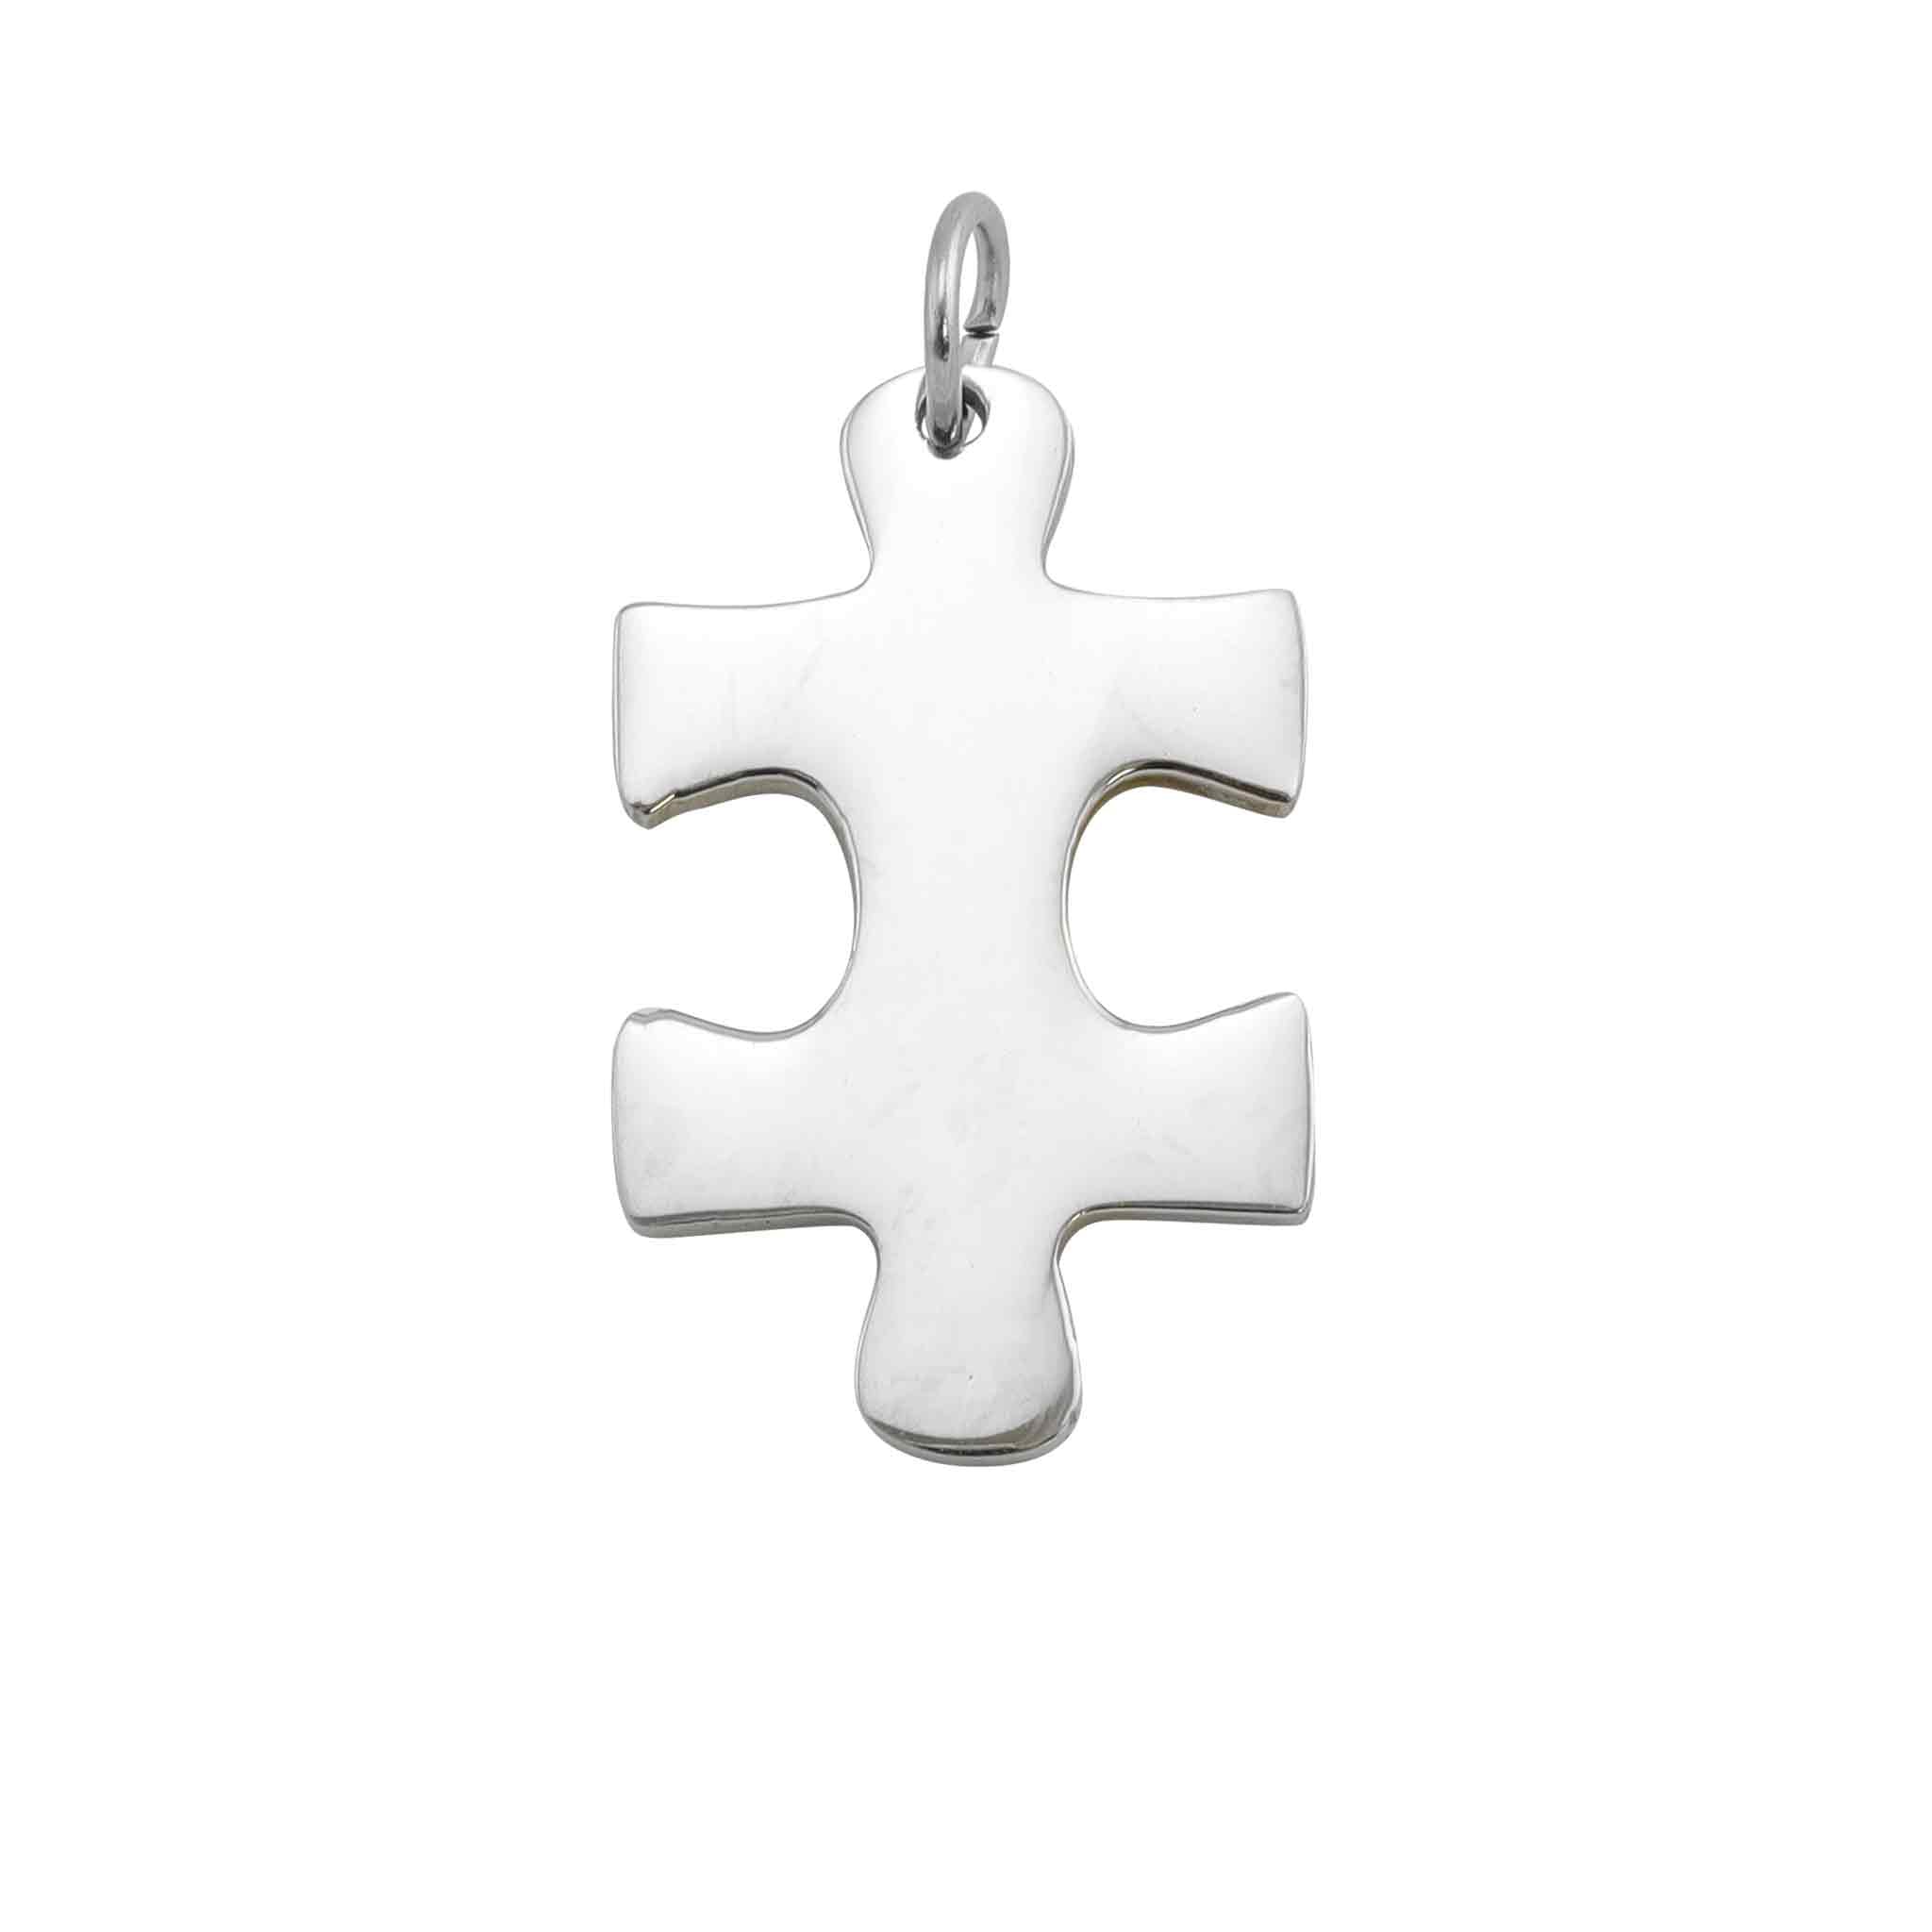 Polished Blank Stainless Steel PUZZLE Piece / SBB0027